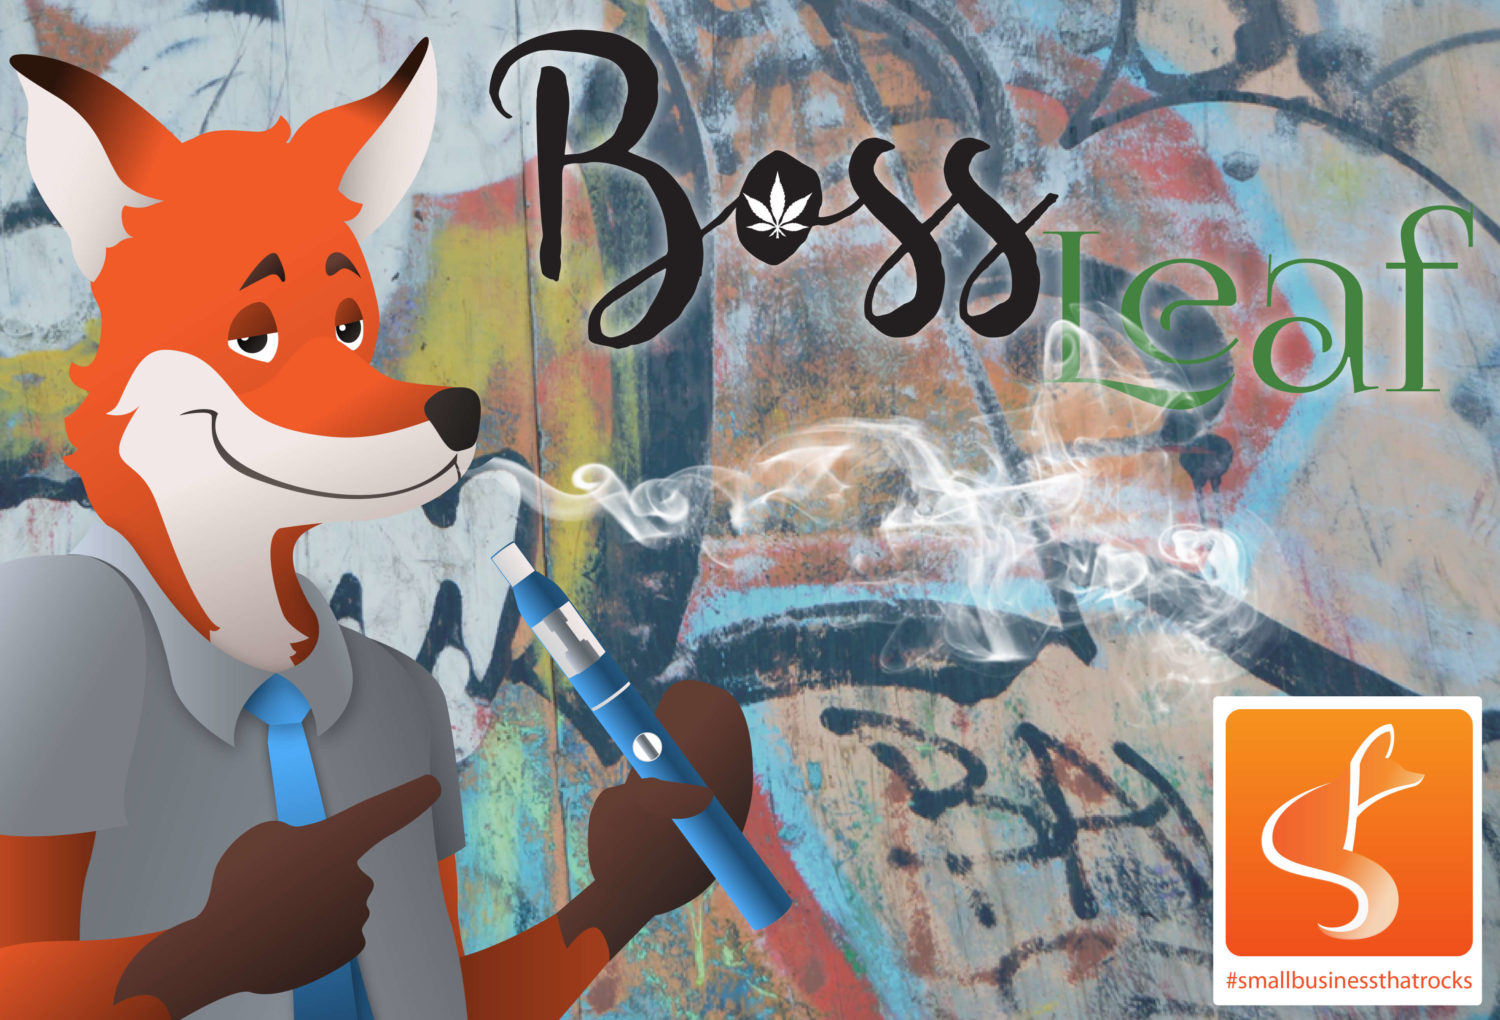 boss leaf feature small business that rocks - sly fox web design